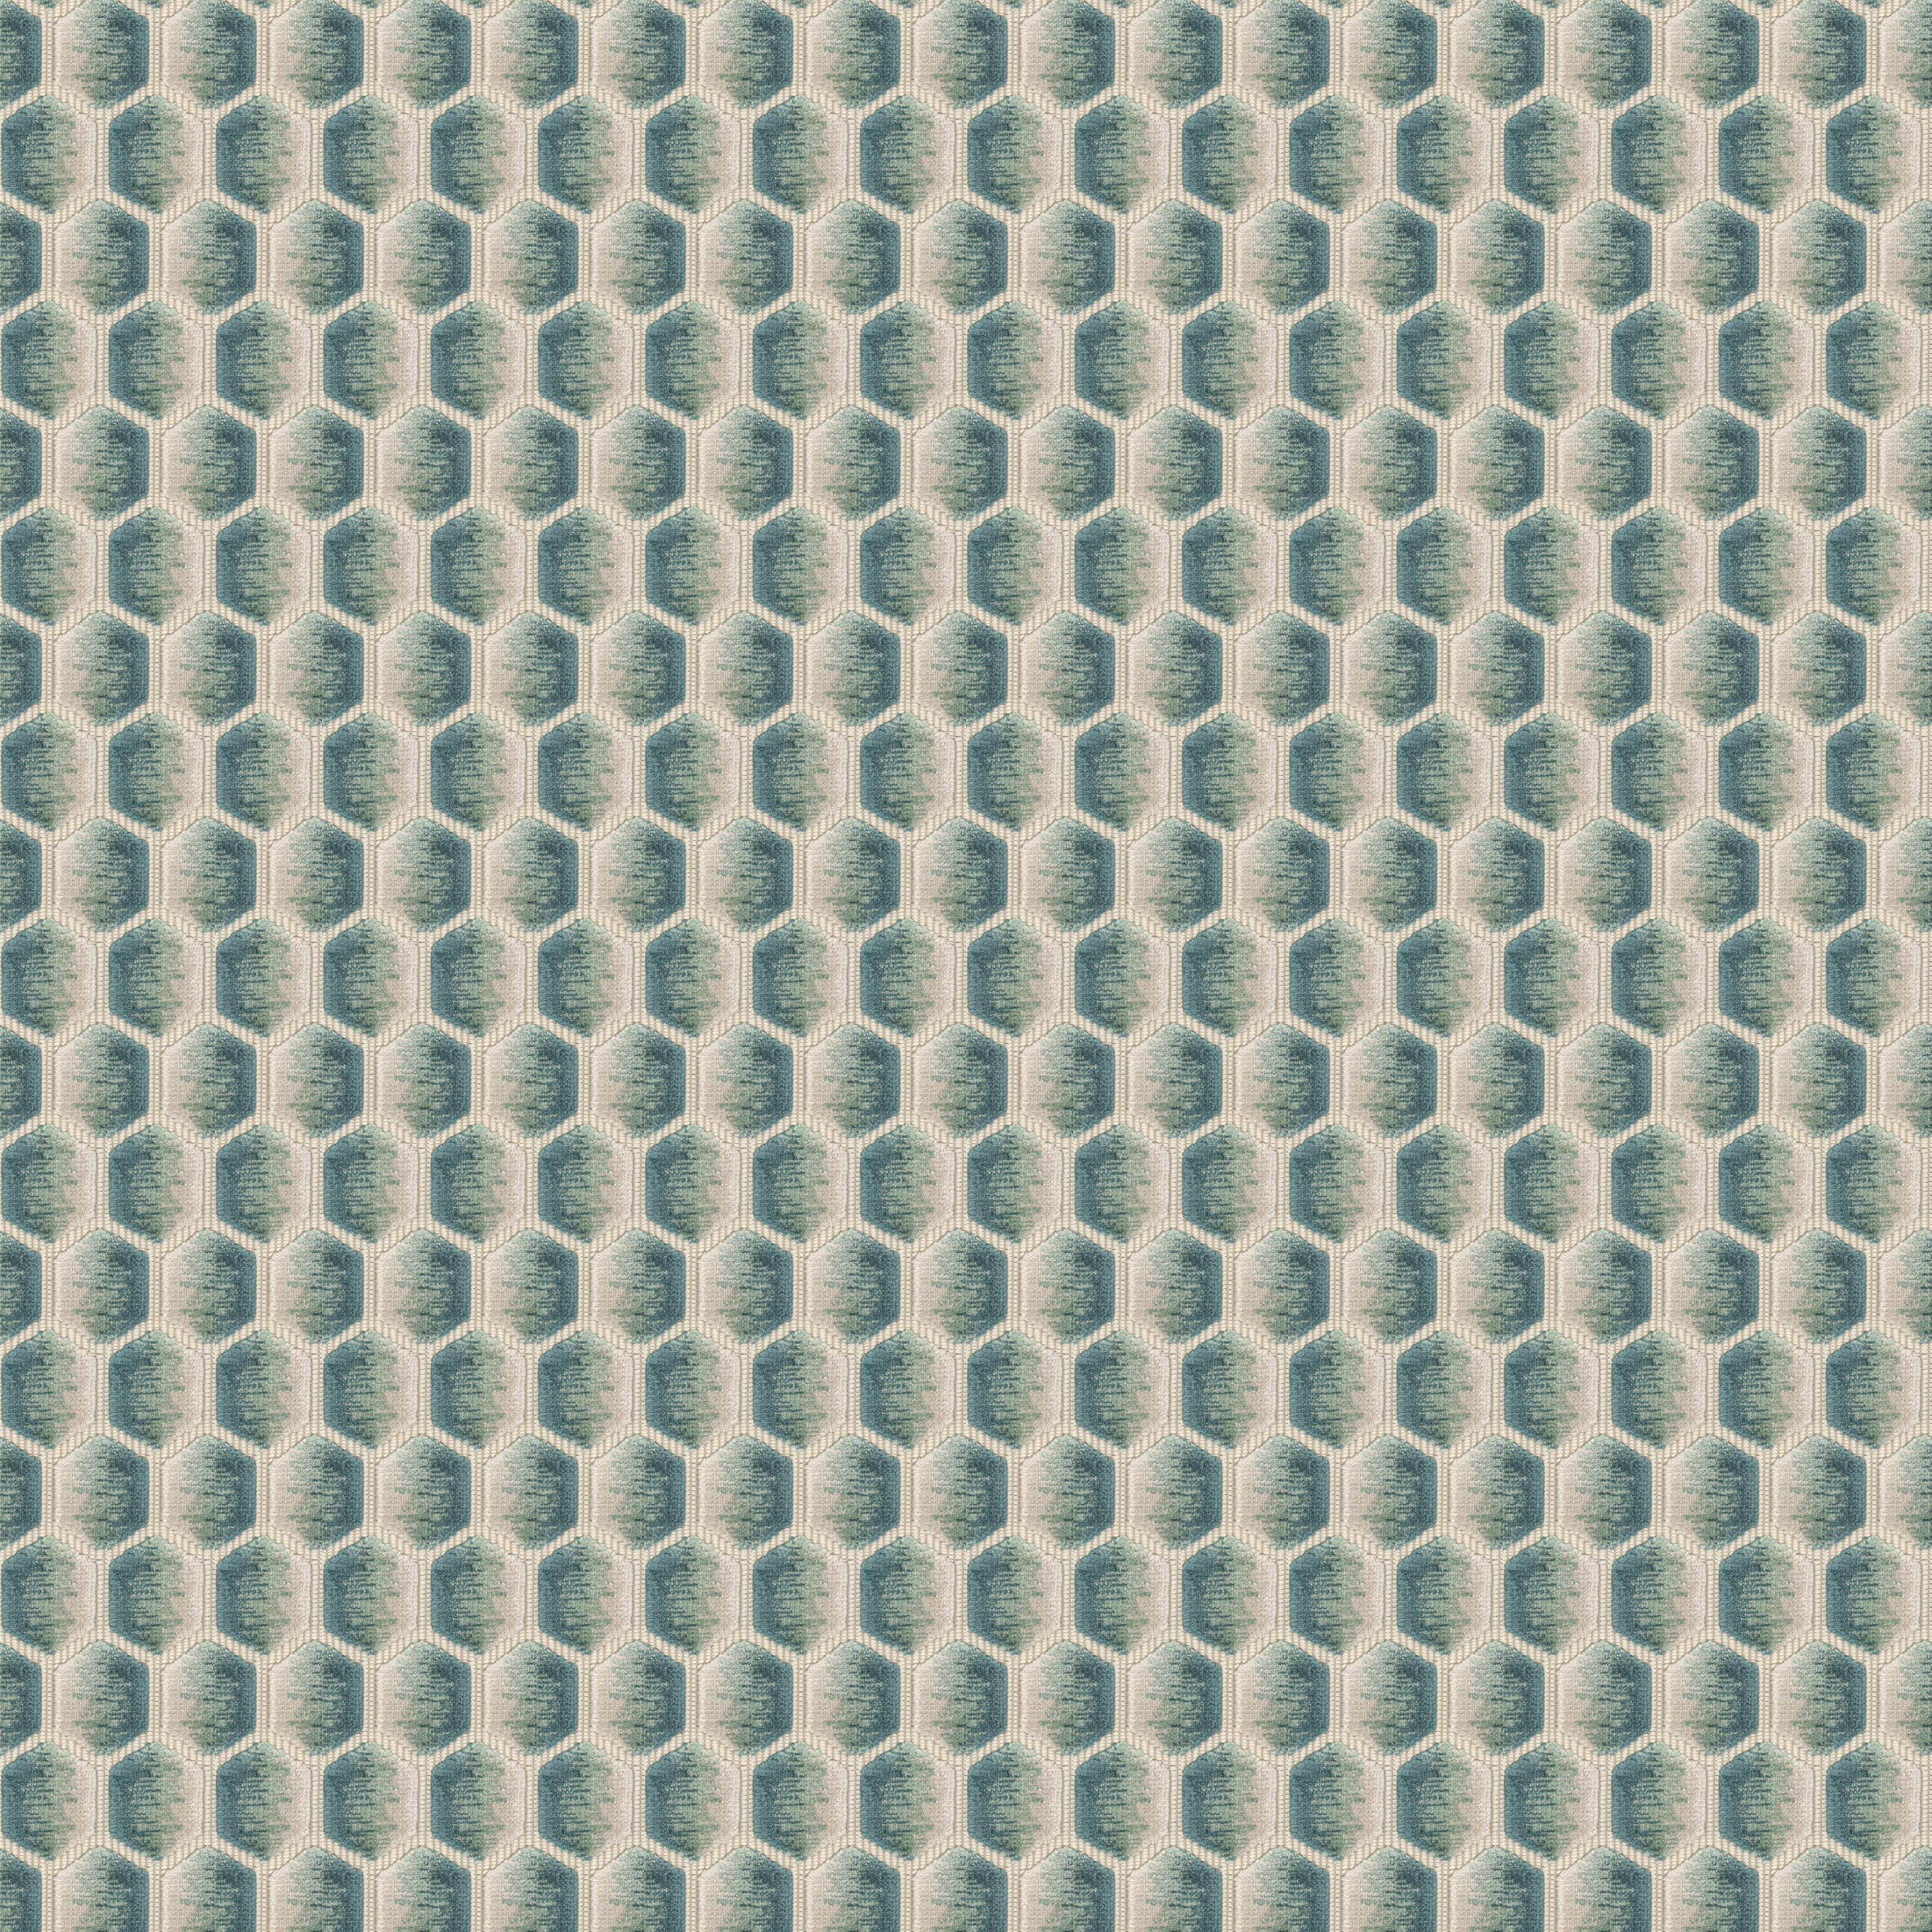 Porza 3 Turquoise by Stout Fabric